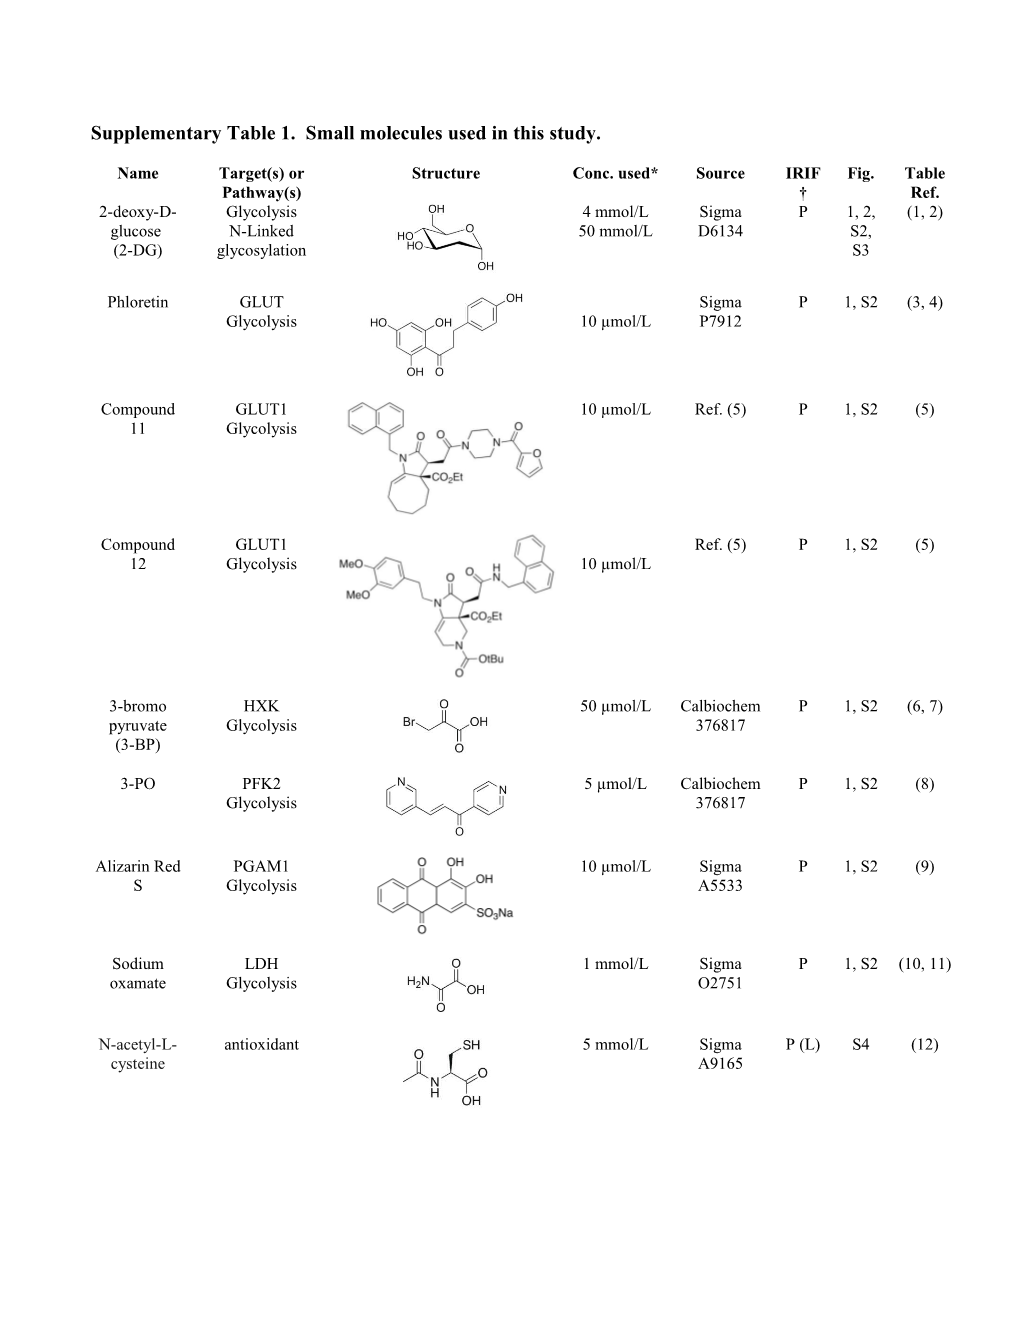 Supplementary Table 1. Small Molecules Used in This Study